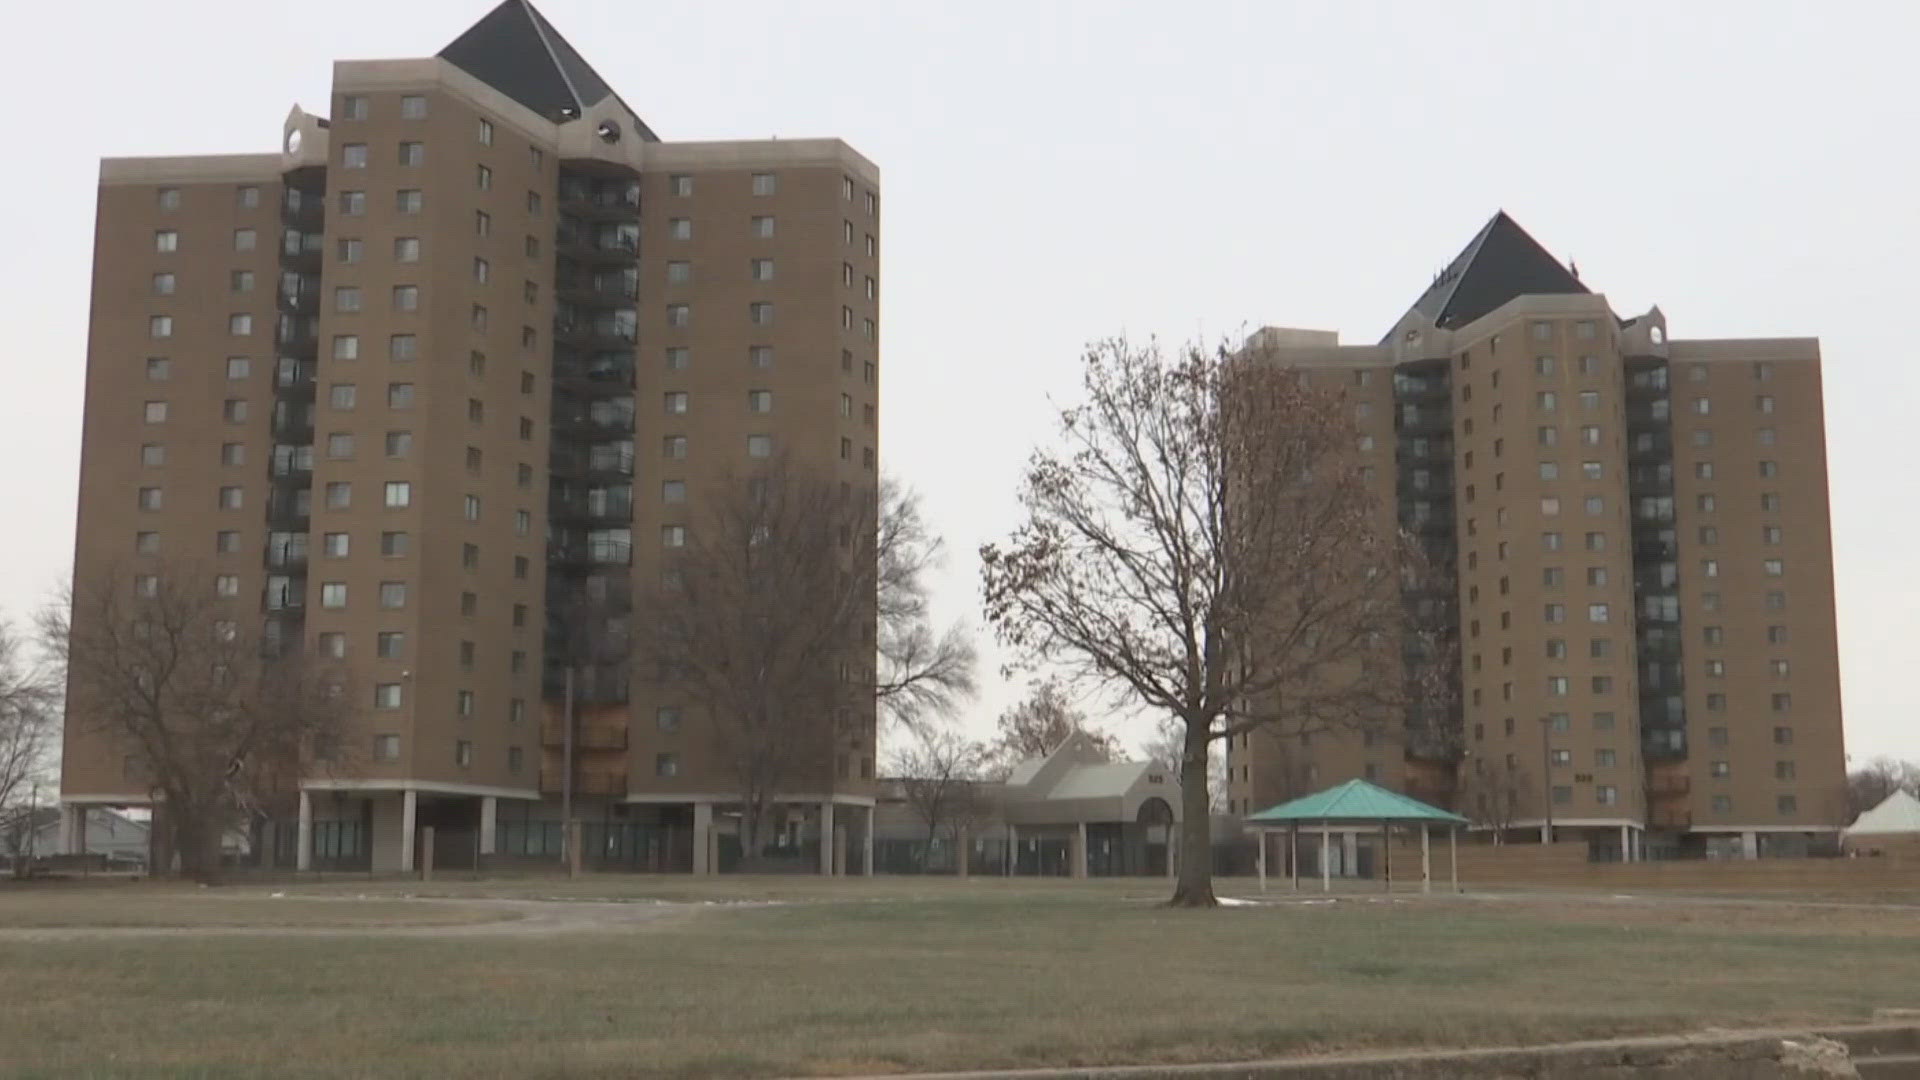 The payments will come from the $1.5 million settlement city officials reached with the former owners of the complex in January.